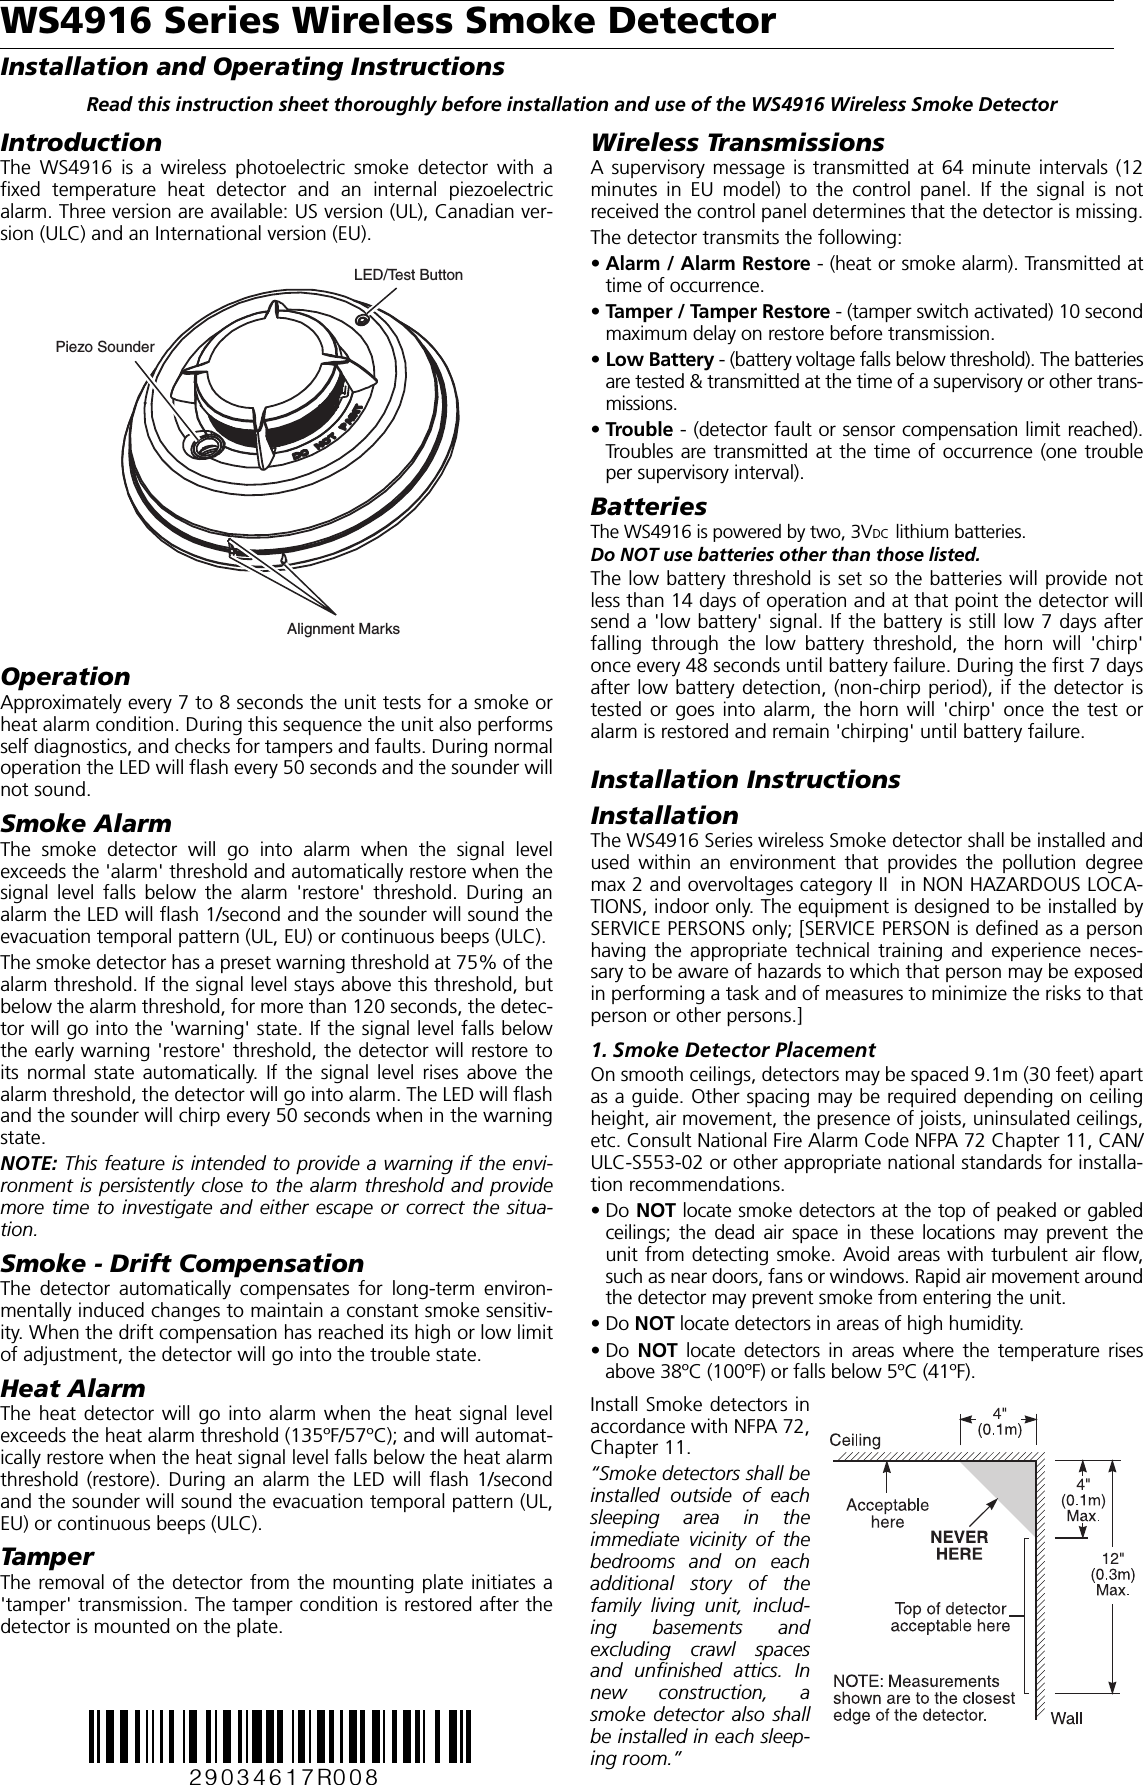 WS4916 Series Wireless Smoke DetectorInstallation and Operating InstructionsRead this instruction sheet thoroughly before installation and use of the WS4916 Wireless Smoke DetectorIntroductionThe WS4916 is a wireless photoelectric smoke detector with afixed temperature heat detector and an internal piezoelectricalarm. Three version are available: US version (UL), Canadian ver-sion (ULC) and an International version (EU).OperationApproximately every 7 to 8 seconds the unit tests for a smoke orheat alarm condition. During this sequence the unit also performsself diagnostics, and checks for tampers and faults. During normaloperation the LED will flash every 50 seconds and the sounder willnot sound.Smoke AlarmThe smoke detector will go into alarm when the signal levelexceeds the &apos;alarm&apos; threshold and automatically restore when thesignal level falls below the alarm &apos;restore&apos; threshold. During analarm the LED will flash 1/second and the sounder will sound theevacuation temporal pattern (UL, EU) or continuous beeps (ULC).The smoke detector has a preset warning threshold at 75% of thealarm threshold. If the signal level stays above this threshold, butbelow the alarm threshold, for more than 120 seconds, the detec-tor will go into the &apos;warning&apos; state. If the signal level falls belowthe early warning &apos;restore&apos; threshold, the detector will restore toits normal state automatically. If the signal level rises above thealarm threshold, the detector will go into alarm. The LED will flashand the sounder will chirp every 50 seconds when in the warningstate.NOTE: This feature is intended to provide a warning if the envi-ronment is persistently close to the alarm threshold and providemore time to investigate and either escape or correct the situa-tion.Smoke - Drift CompensationThe detector automatically compensates for long-term environ-mentally induced changes to maintain a constant smoke sensitiv-ity. When the drift compensation has reached its high or low limitof adjustment, the detector will go into the trouble state.Heat AlarmThe heat detector will go into alarm when the heat signal levelexceeds the heat alarm threshold (135ºF/57ºC); and will automat-ically restore when the heat signal level falls below the heat alarmthreshold (restore). During an alarm the LED will flash 1/secondand the sounder will sound the evacuation temporal pattern (UL,EU) or continuous beeps (ULC).TamperThe removal of the detector from the mounting plate initiates a&apos;tamper&apos; transmission. The tamper condition is restored after thedetector is mounted on the plate.Wireless TransmissionsA supervisory message is transmitted at 64 minute intervals (12minutes in EU model) to the control panel. If the signal is notreceived the control panel determines that the detector is missing.The detector transmits the following:•Alarm / Alarm Restore - (heat or smoke alarm). Transmitted attime of occurrence.•Tamper / Tamper Restore - (tamper switch activated) 10 secondmaximum delay on restore before transmission. •Low Battery - (battery voltage falls below threshold). The batteriesare tested &amp; transmitted at the time of a supervisory or other trans-missions.•Trouble - (detector fault or sensor compensation limit reached).Troubles are transmitted at the time of occurrence (one troubleper supervisory interval).BatteriesThe WS4916 is powered by two, 3VDC  lithium batteries.Do NOT use batteries other than those listed.The low battery threshold is set so the batteries will provide notless than 14 days of operation and at that point the detector willsend a &apos;low battery&apos; signal. If the battery is still low 7 days afterfalling through the low battery threshold, the horn will &apos;chirp&apos;once every 48 seconds until battery failure. During the first 7 daysafter low battery detection, (non-chirp period), if the detector istested or goes into alarm, the horn will &apos;chirp&apos; once the test oralarm is restored and remain &apos;chirping&apos; until battery failure.Installation InstructionsInstallationThe WS4916 Series wireless Smoke detector shall be installed andused within an environment that provides the pollution degreemax 2 and overvoltages category II  in NON HAZARDOUS LOCA-TIONS, indoor only. The equipment is designed to be installed bySERVICE PERSONS only; [SERVICE PERSON is defined as a personhaving the appropriate technical training and experience neces-sary to be aware of hazards to which that person may be exposedin performing a task and of measures to minimize the risks to thatperson or other persons.]1. Smoke Detector PlacementOn smooth ceilings, detectors may be spaced 9.1m (30 feet) apartas a guide. Other spacing may be required depending on ceilingheight, air movement, the presence of joists, uninsulated ceilings,etc. Consult National Fire Alarm Code NFPA 72 Chapter 11, CAN/ULC-S553-02 or other appropriate national standards for installa-tion recommendations. •Do NOT locate smoke detectors at the top of peaked or gabledceilings; the dead air space in these locations may prevent theunit from detecting smoke. Avoid areas with turbulent air flow,such as near doors, fans or windows. Rapid air movement aroundthe detector may prevent smoke from entering the unit.•Do NOT locate detectors in areas of high humidity.•Do NOT locate detectors in areas where the temperature risesabove 38ºC (100ºF) or falls below 5ºC (41ºF).Install Smoke detectors inaccordance with NFPA 72,Chapter 11.“Smoke detectors shall beinstalled outside of eachsleeping area in theimmediate vicinity of thebedrooms and on eachadditional story of thefamily living unit, includ-ing basements andexcluding crawl spacesand unfinished attics. Innew construction, asmoke detector also shallbe installed in each sleep-ing room.”LED/Test ButtonPiezo SounderAlignment Marks29034617R008